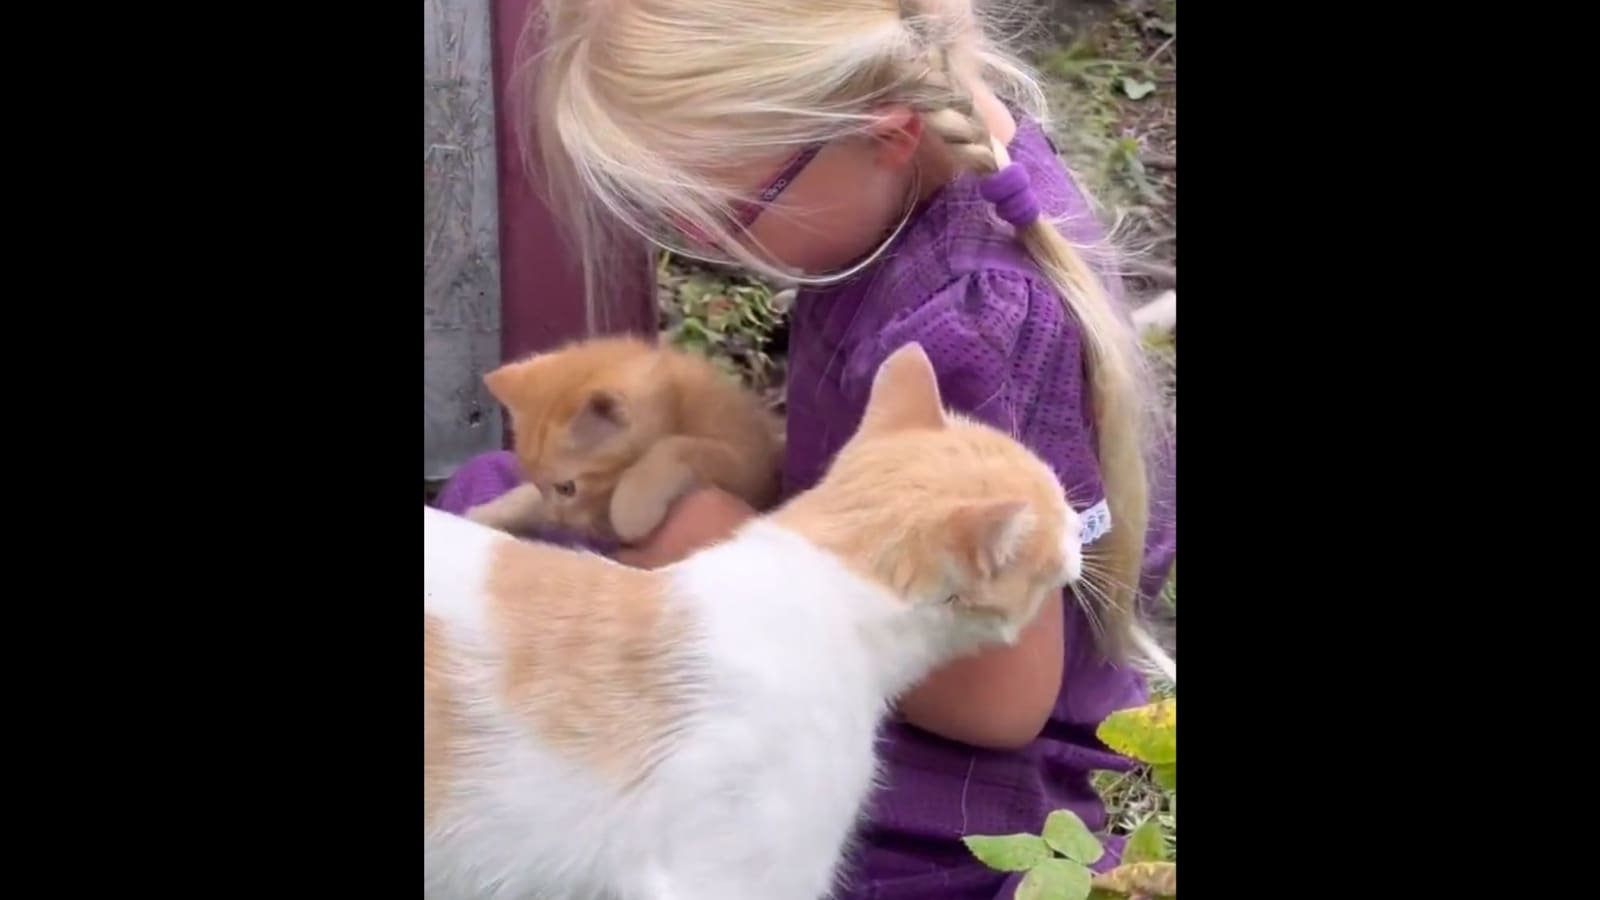 Mama cat introduces kitten to little girl in viral video. Watch